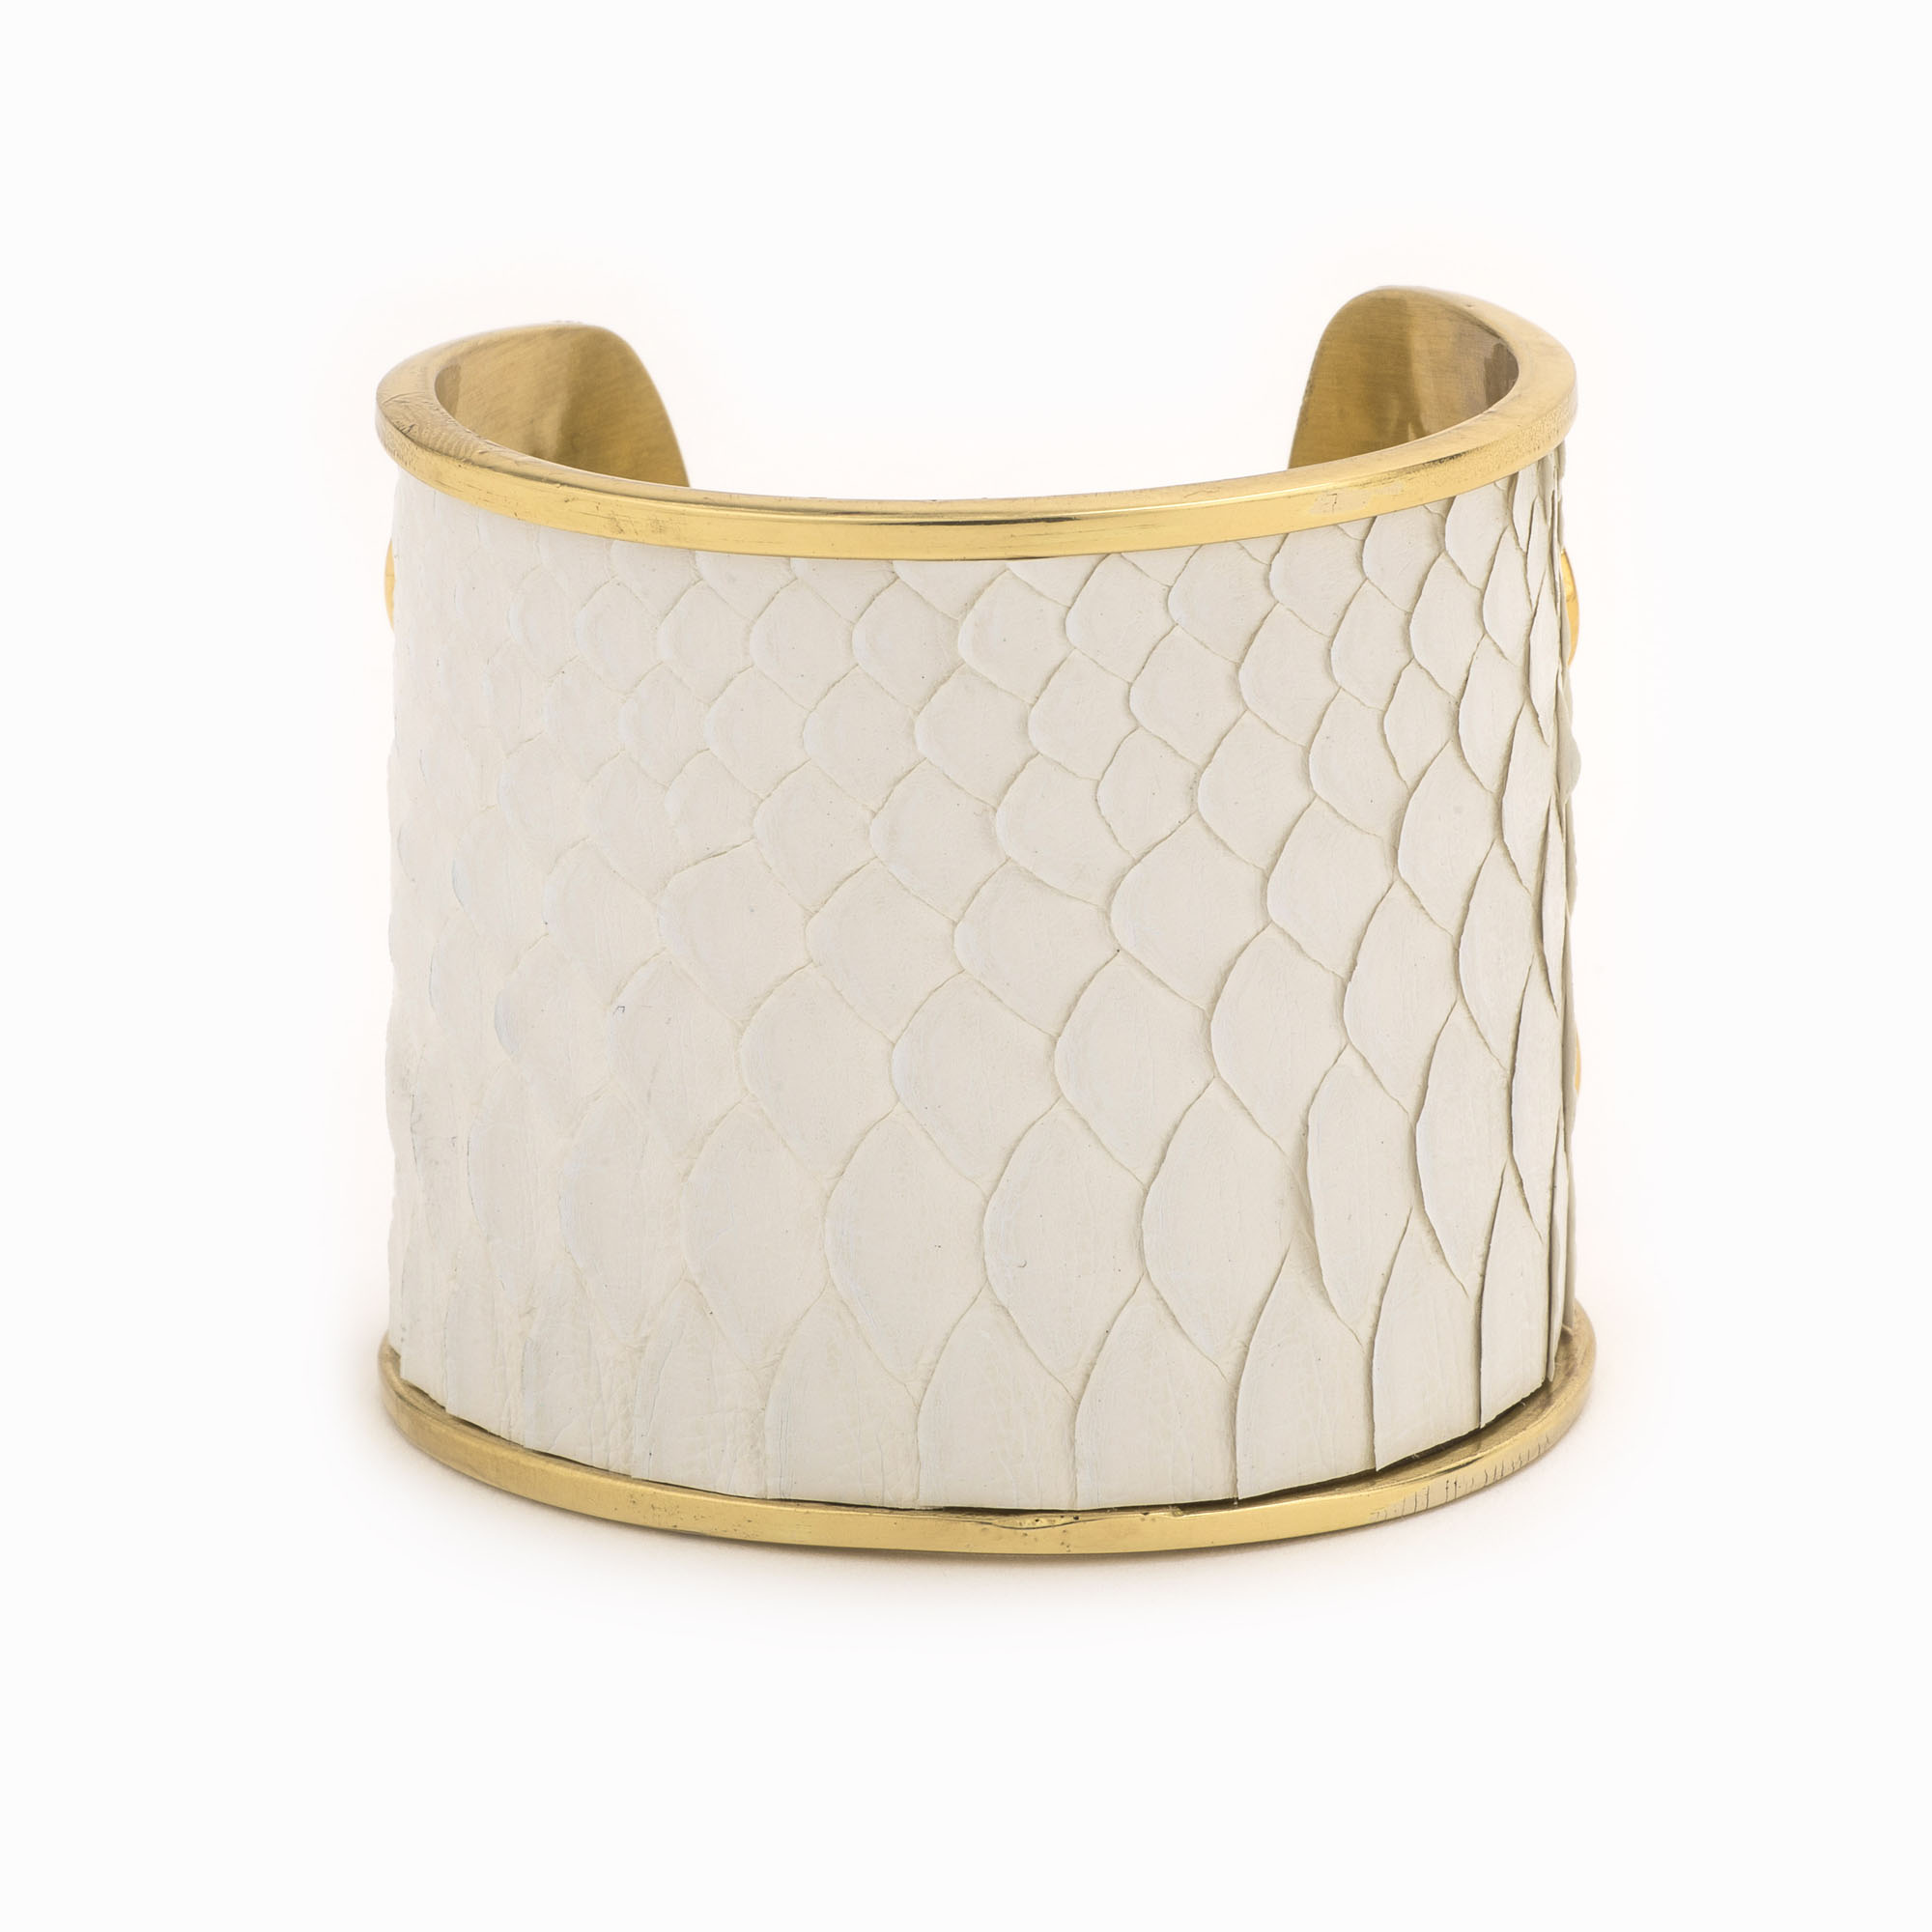 Featured image for “Large White Gold Cuff”